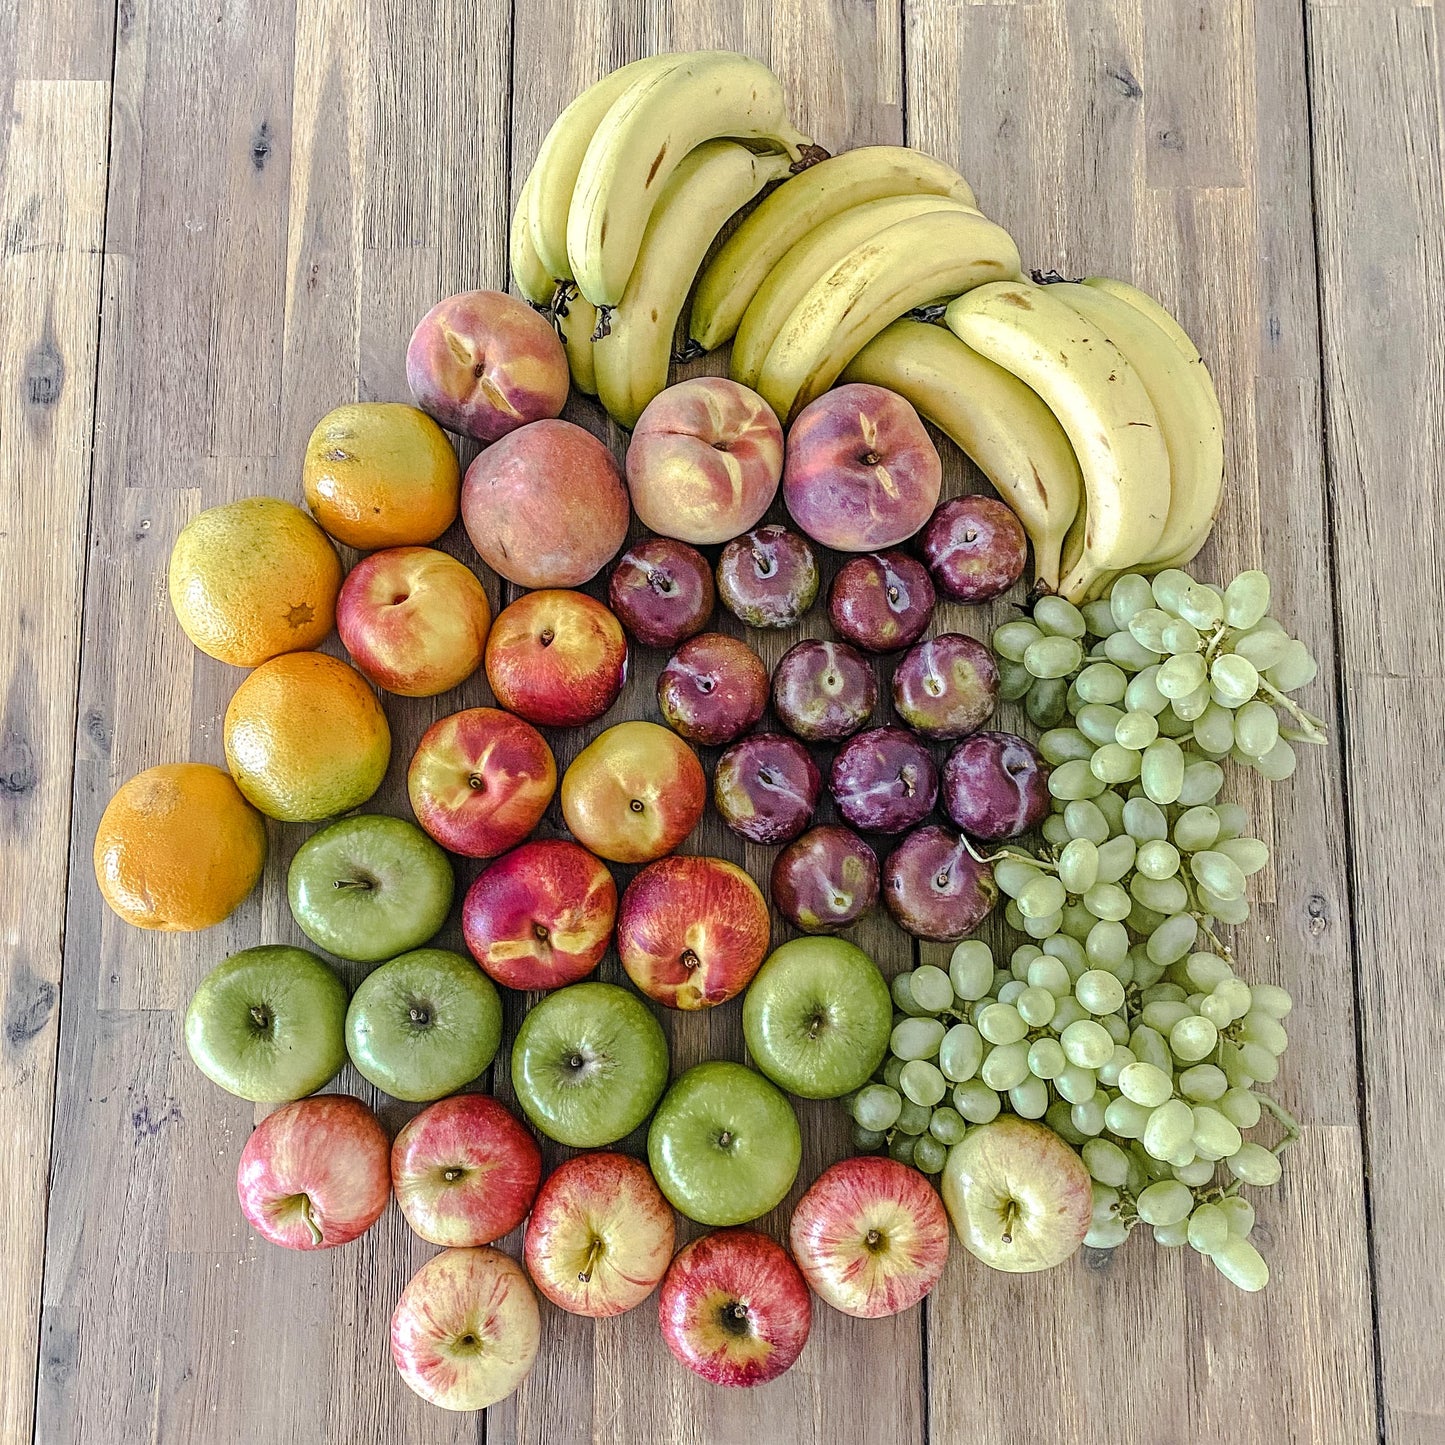 Fruit-Only FarmBOX